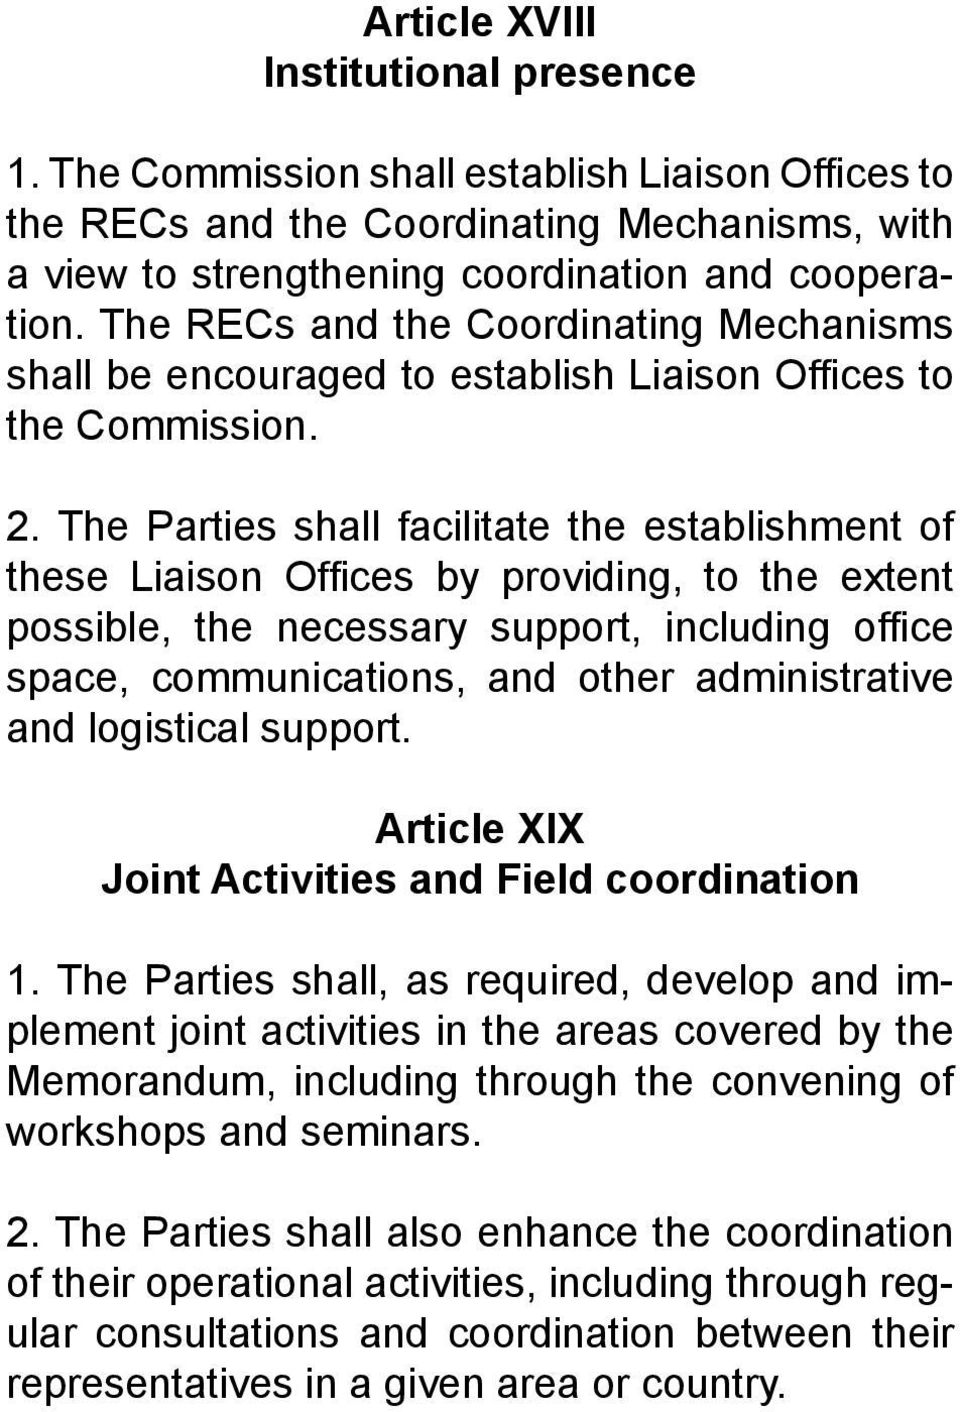 The Parties shall facilitate the establishment of these Liaison Offices by providing, to the extent possible, the necessary support, including office space, communications, and other administrative